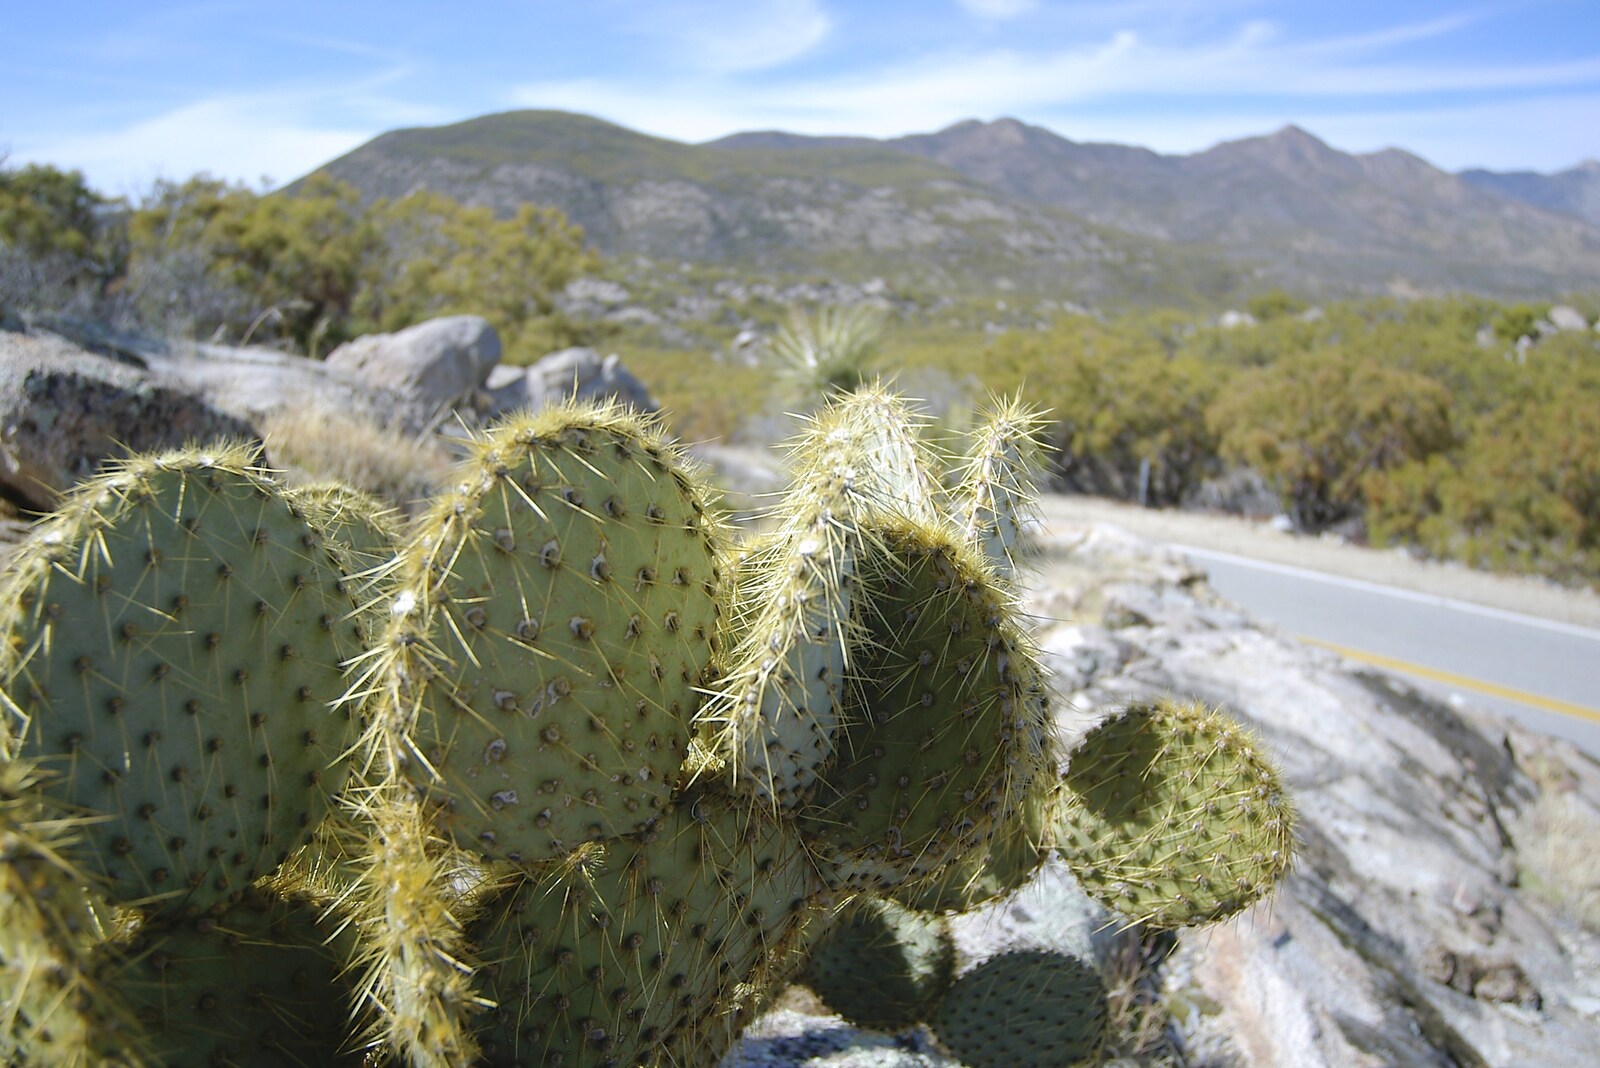 Prickly Pear cactus from Mojave Desert: San Diego to Joshua Tree and Twentynine Palms, California, US - 5th March 2006